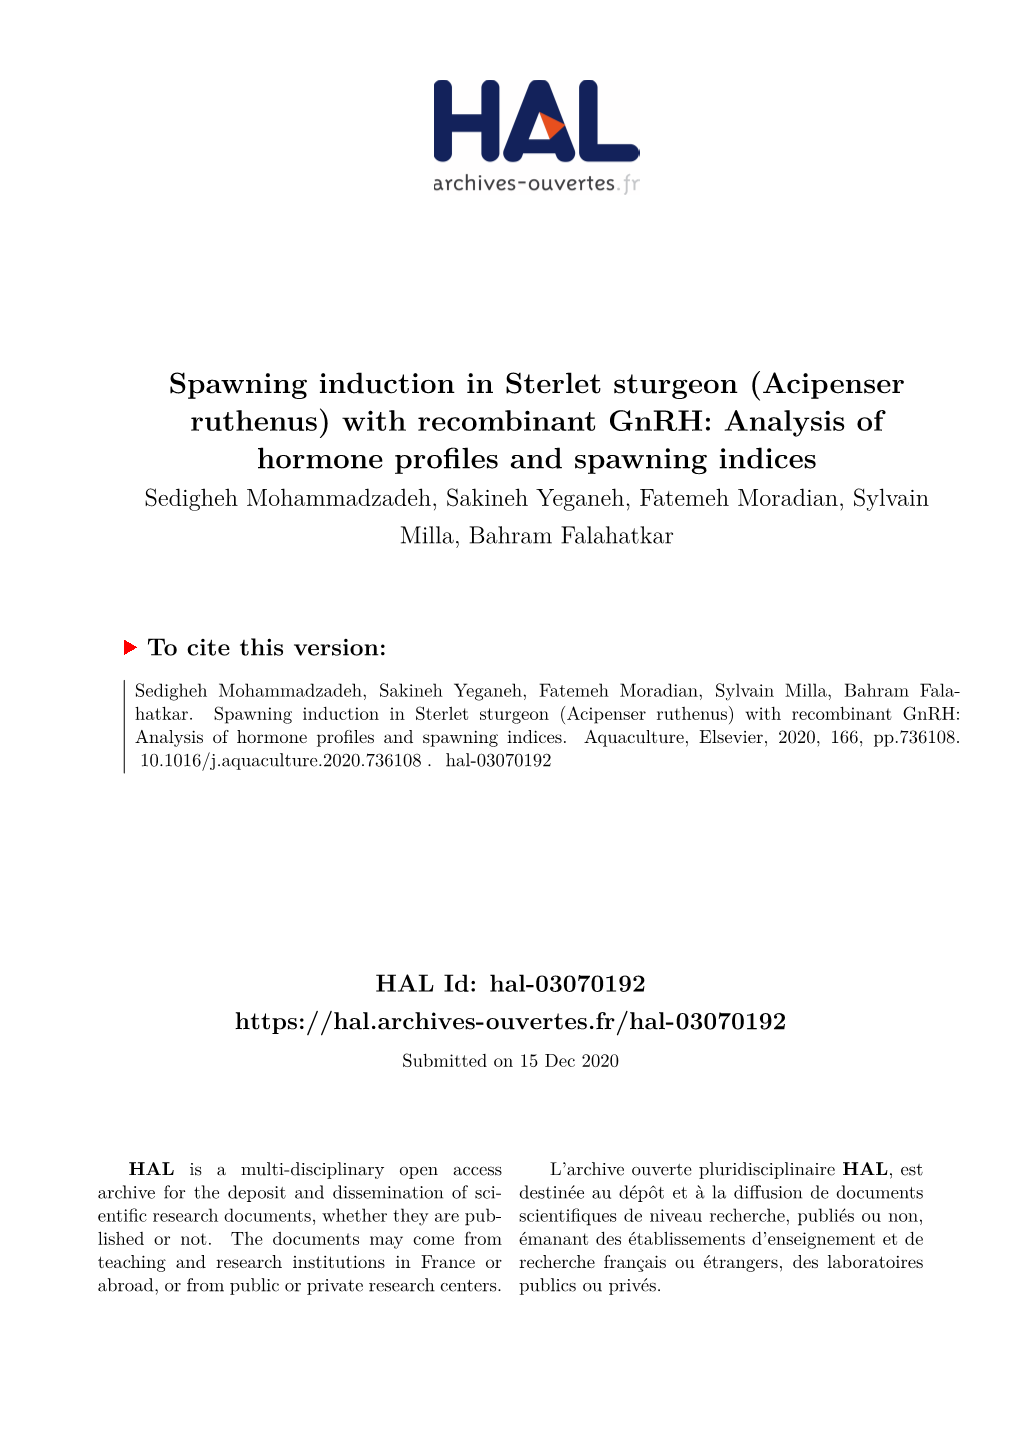 Spawning Induction in Sterlet Sturgeon